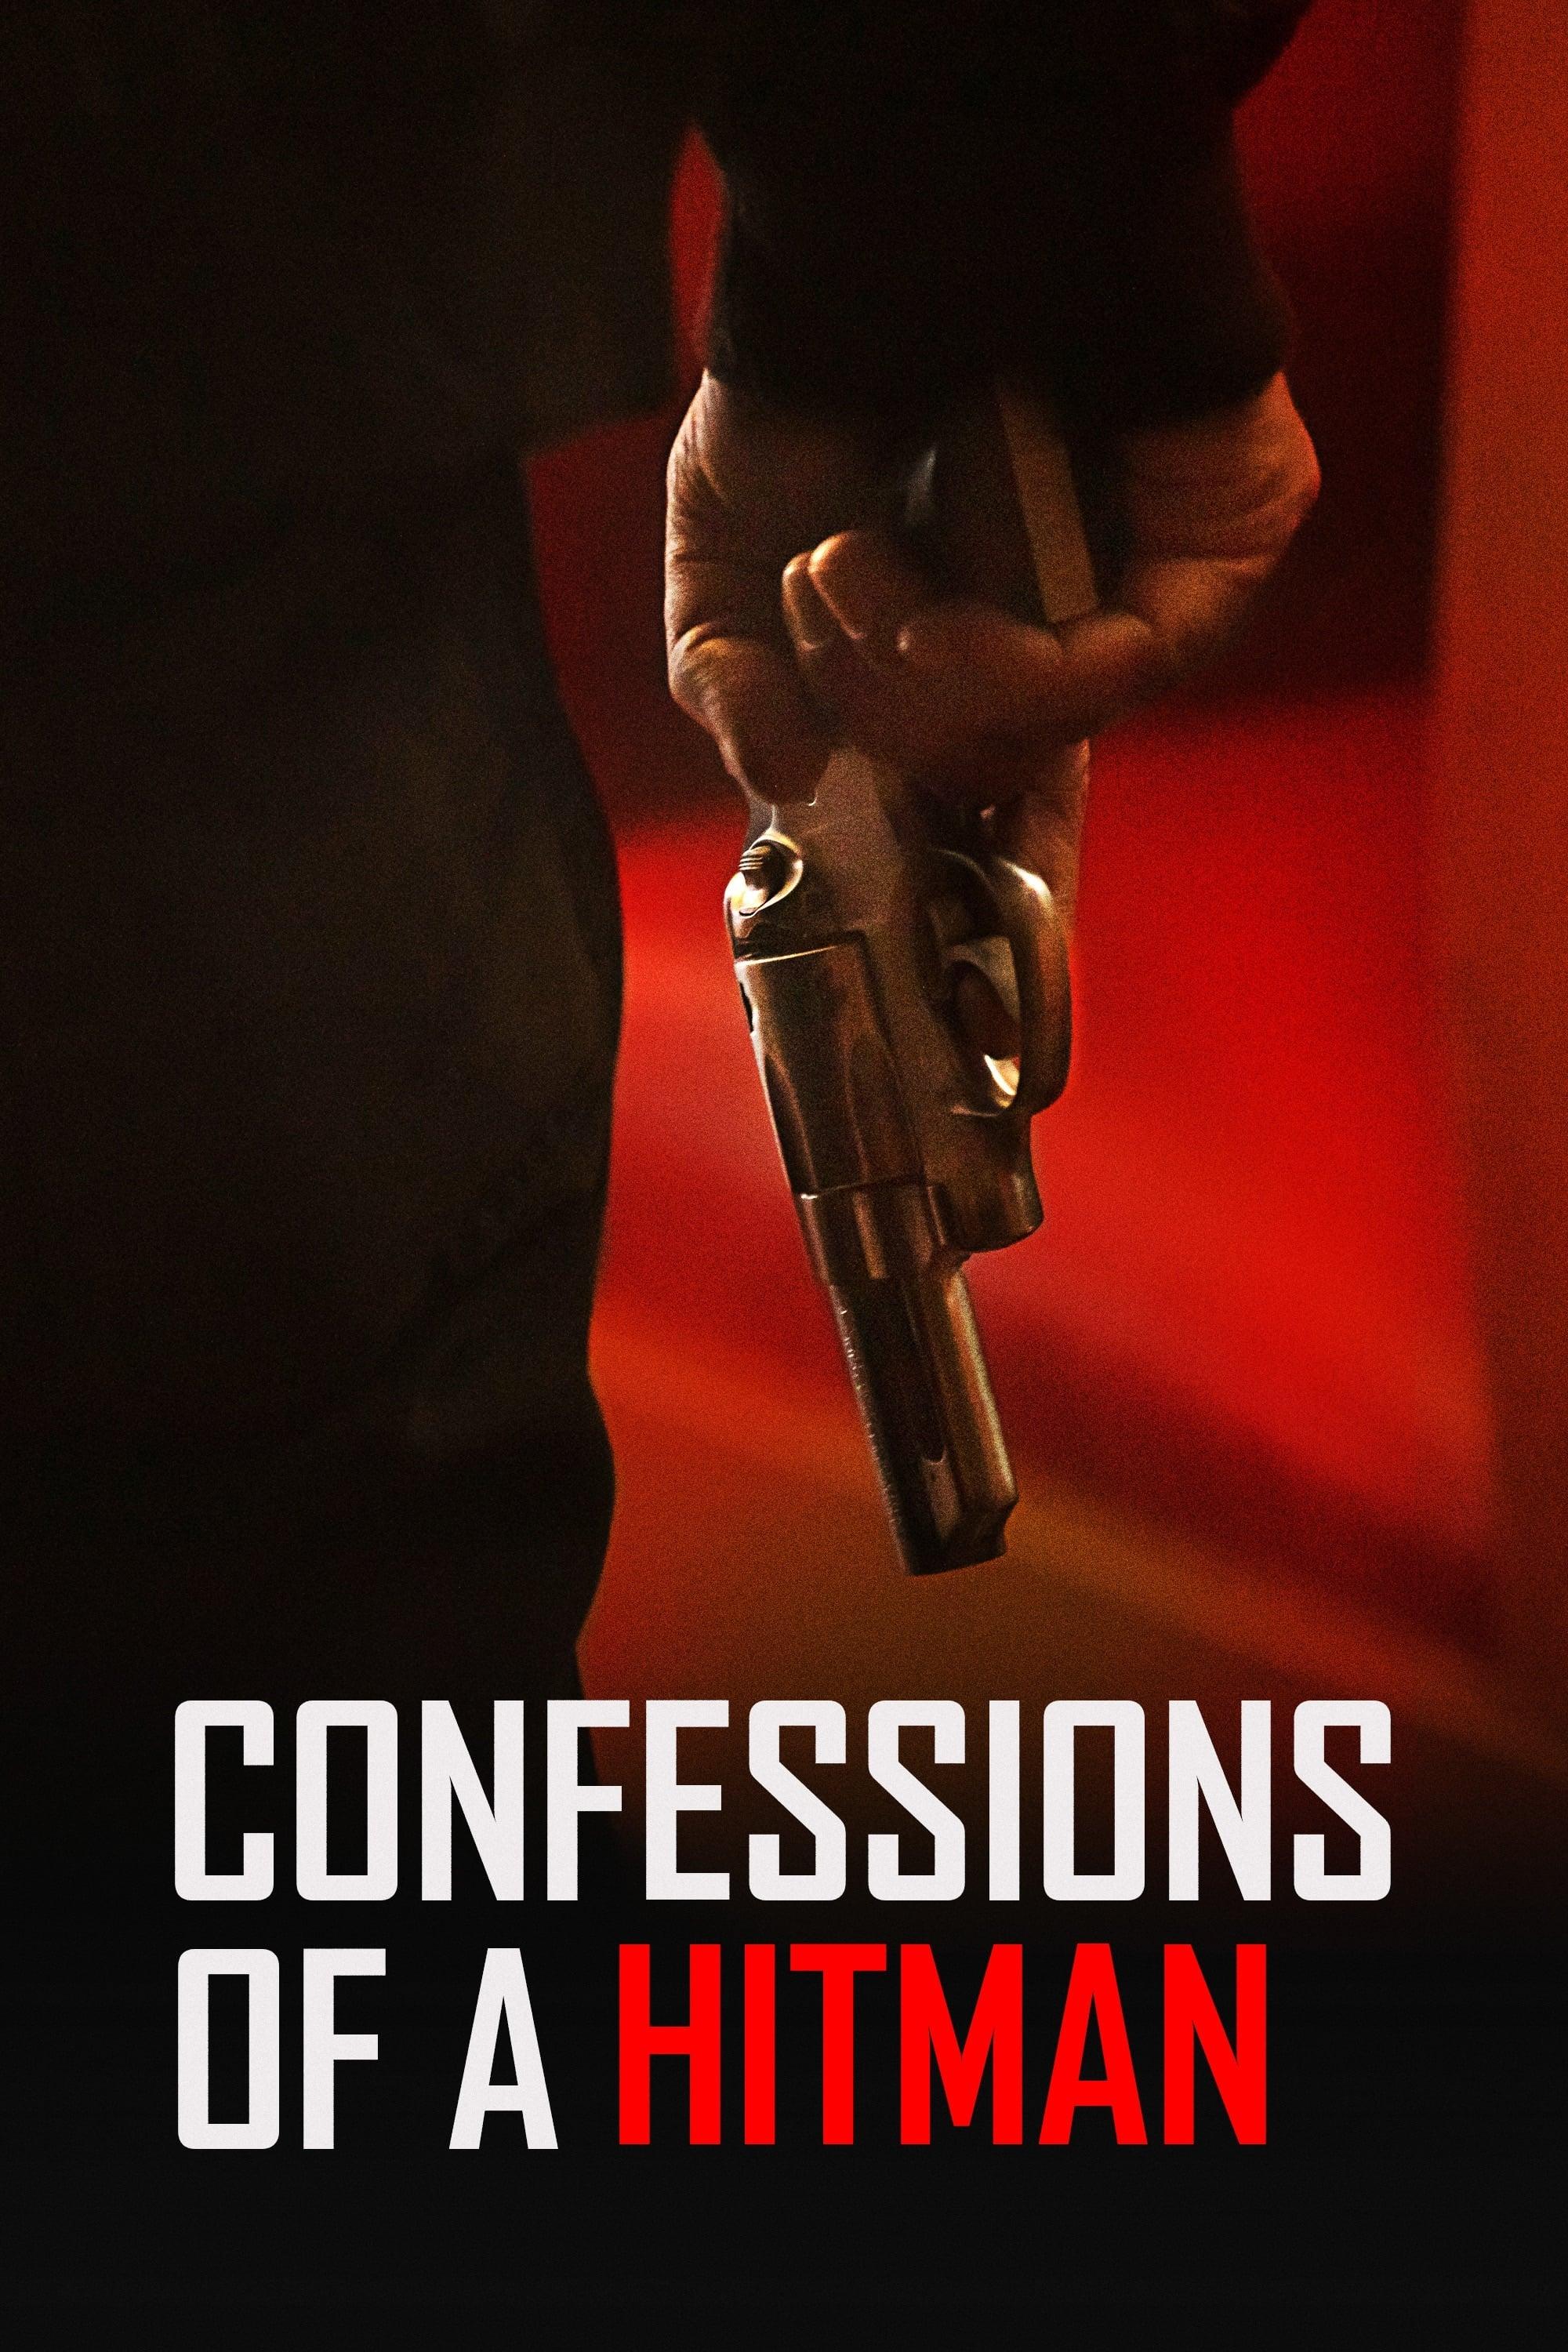 Confessions of a Hitman poster